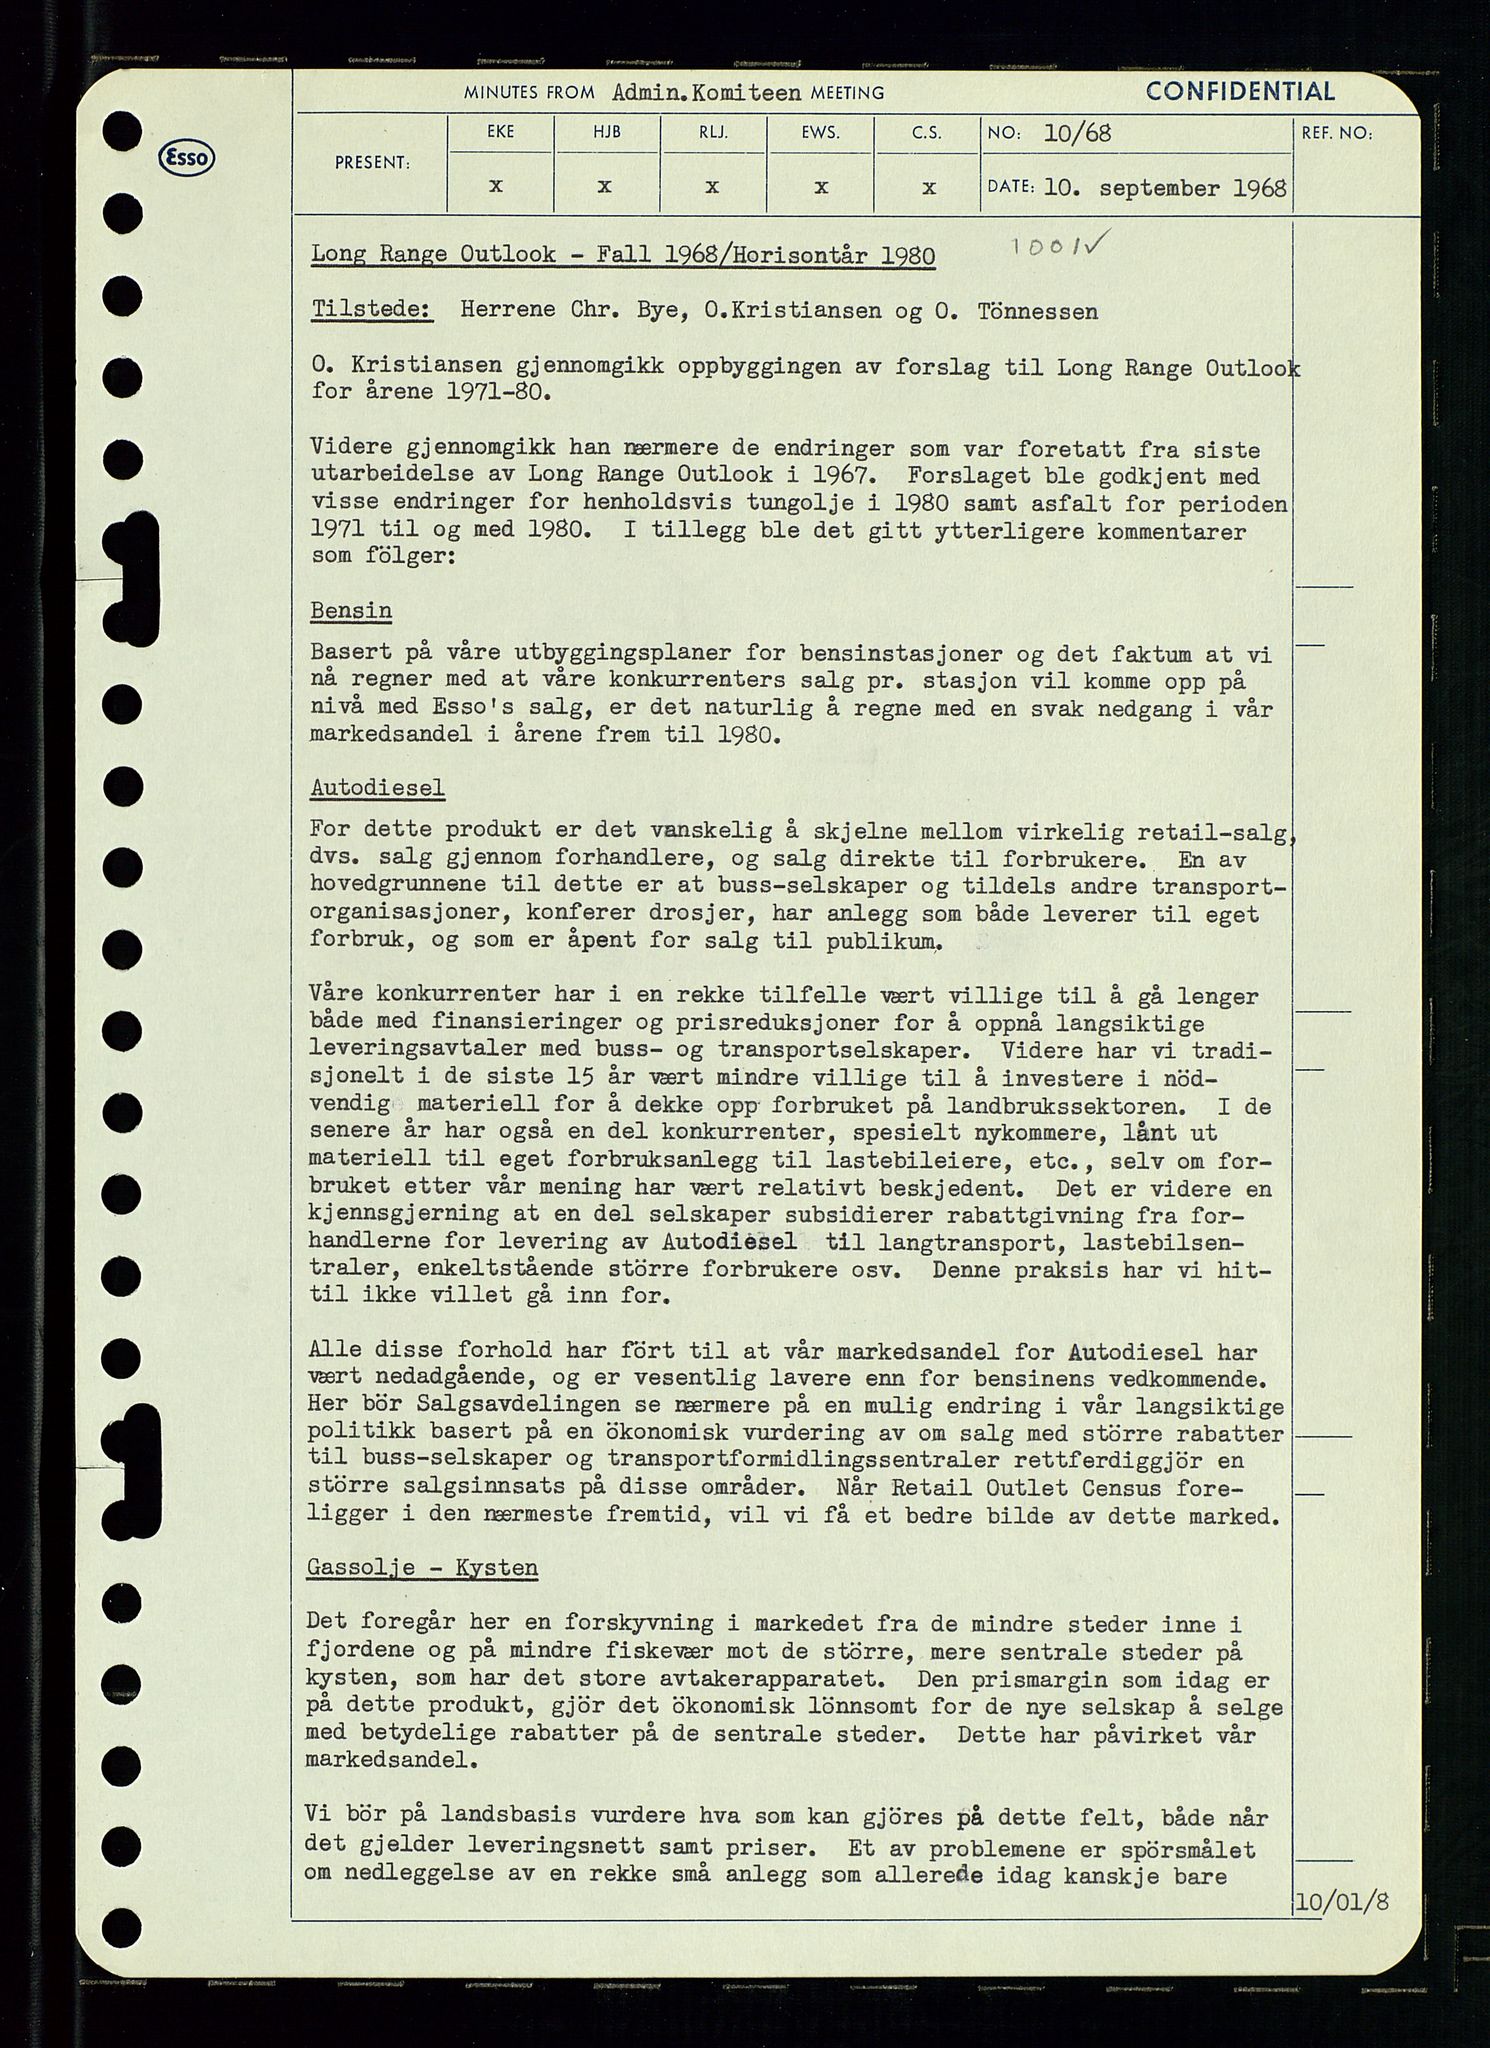 Pa 0982 - Esso Norge A/S, SAST/A-100448/A/Aa/L0002/0004: Den administrerende direksjon Board minutes (styrereferater) / Den administrerende direksjon Board minutes (styrereferater), 1968, p. 85